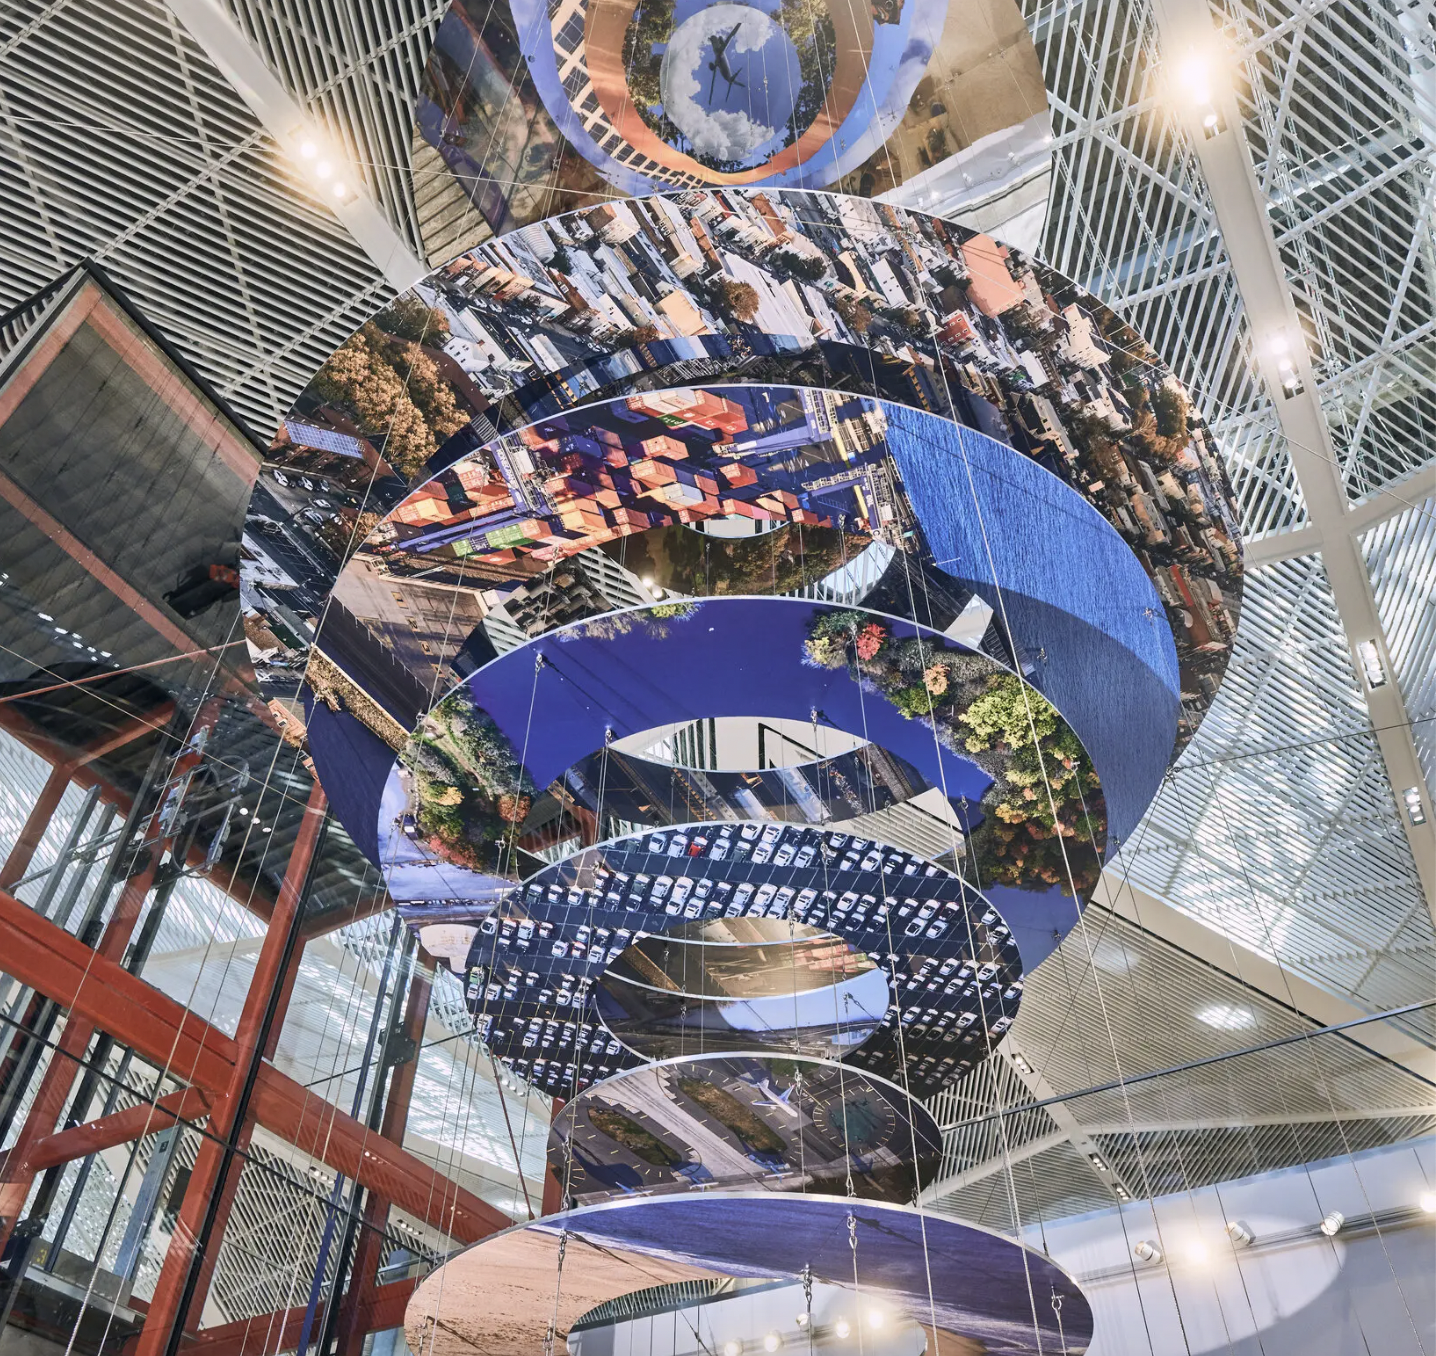 A series of disks hangs from the ceiling of a large, industrial building. The disks are covered in photographs shot from the aerial perspective, including a car park, a beach, city buildings, and a harbor freight transport. The sculpture as a whole seems very futuristic, evoking notions of satellites observing earth.